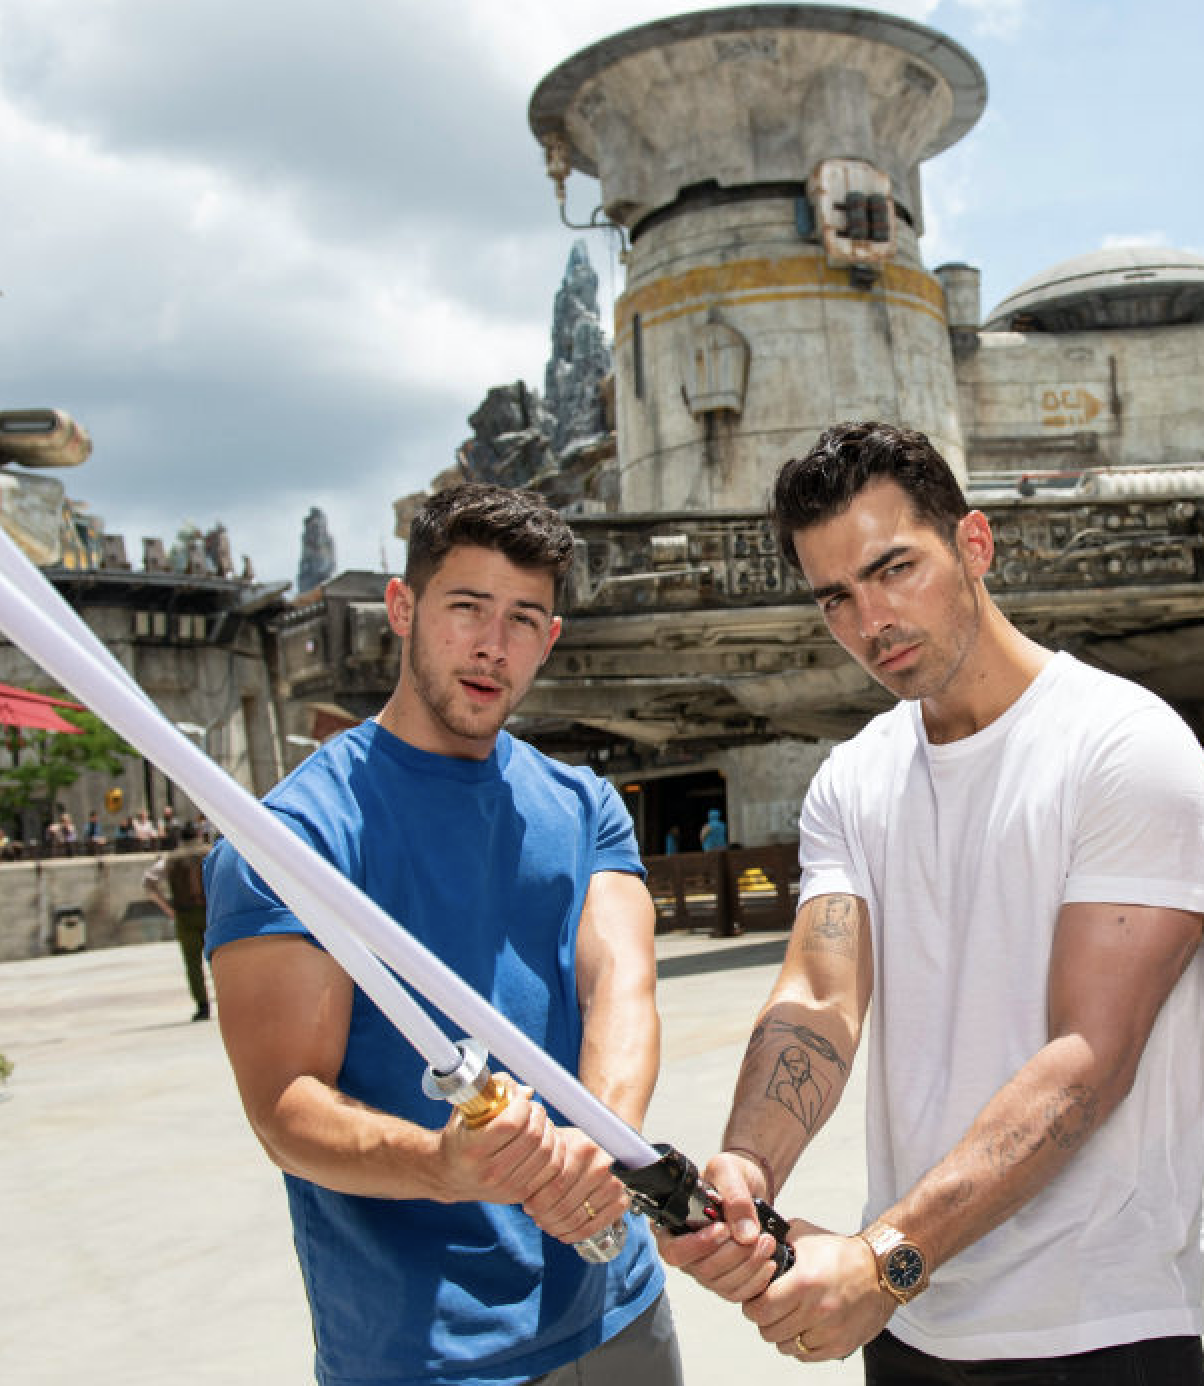 Joe and Nick holding lightsabers at the Star Wars part of Disney World